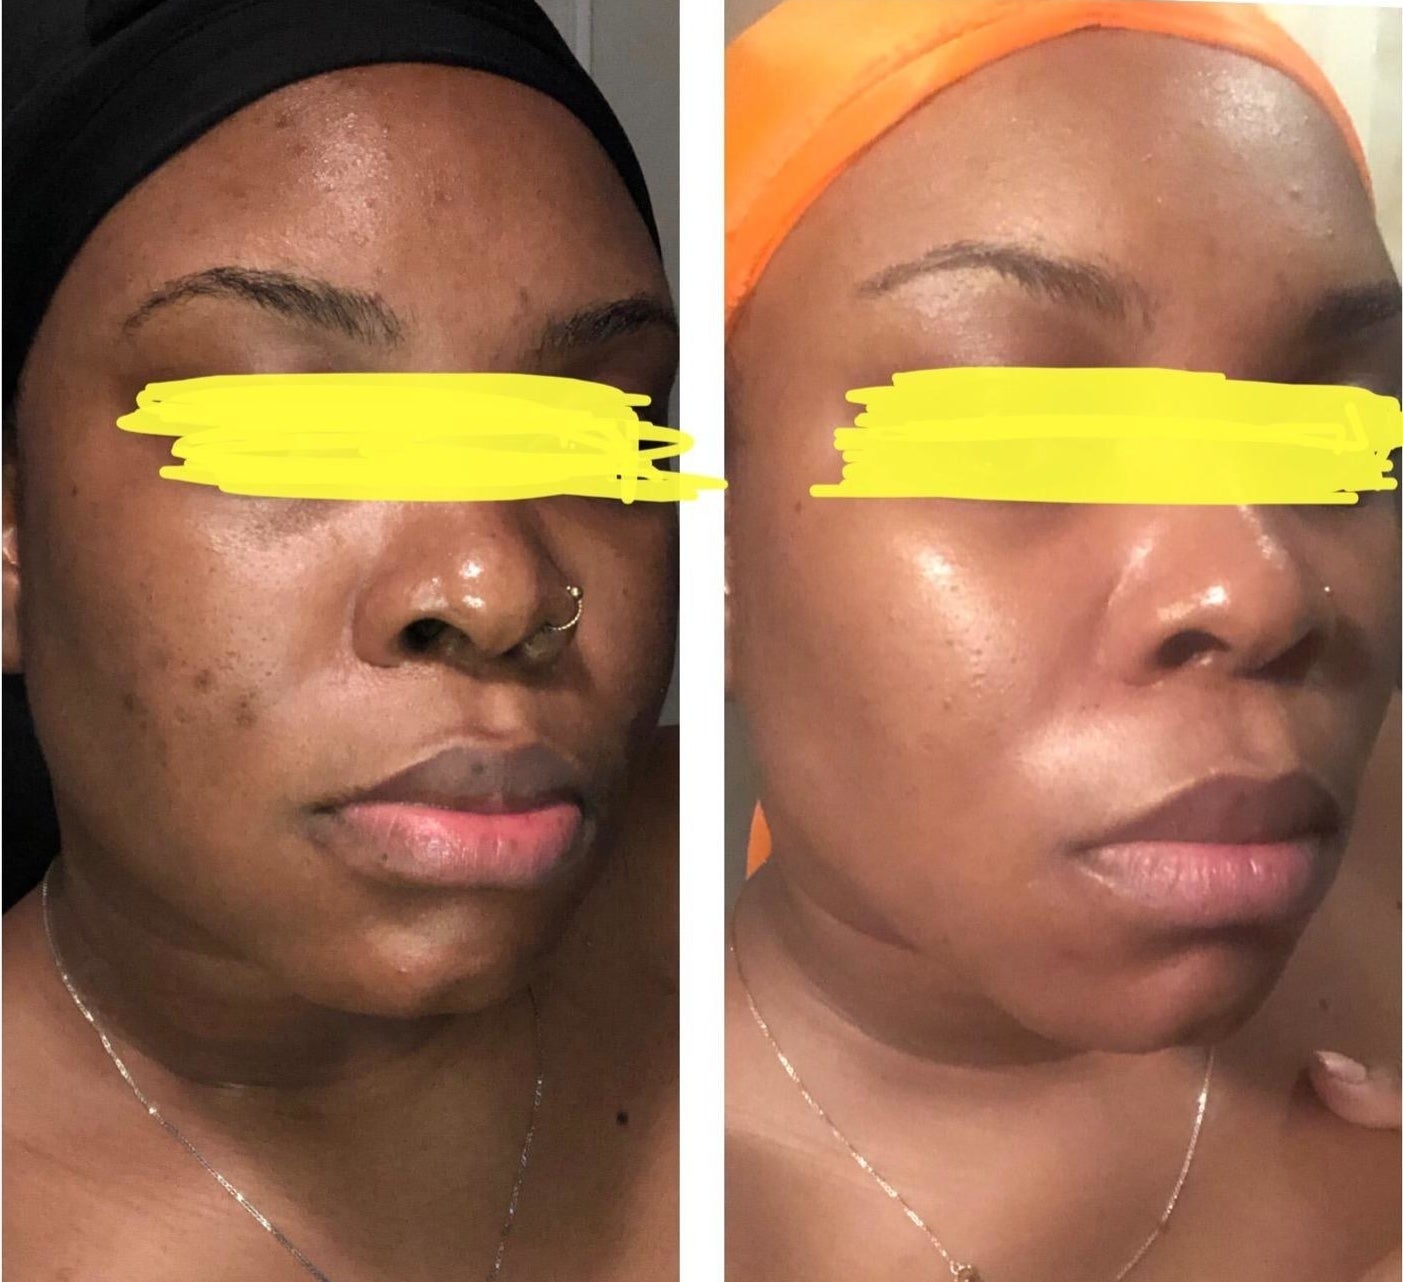 Before and after of reviewer who used the cleanser showing that it evened their skin tone, improved texture, and made their skin glow